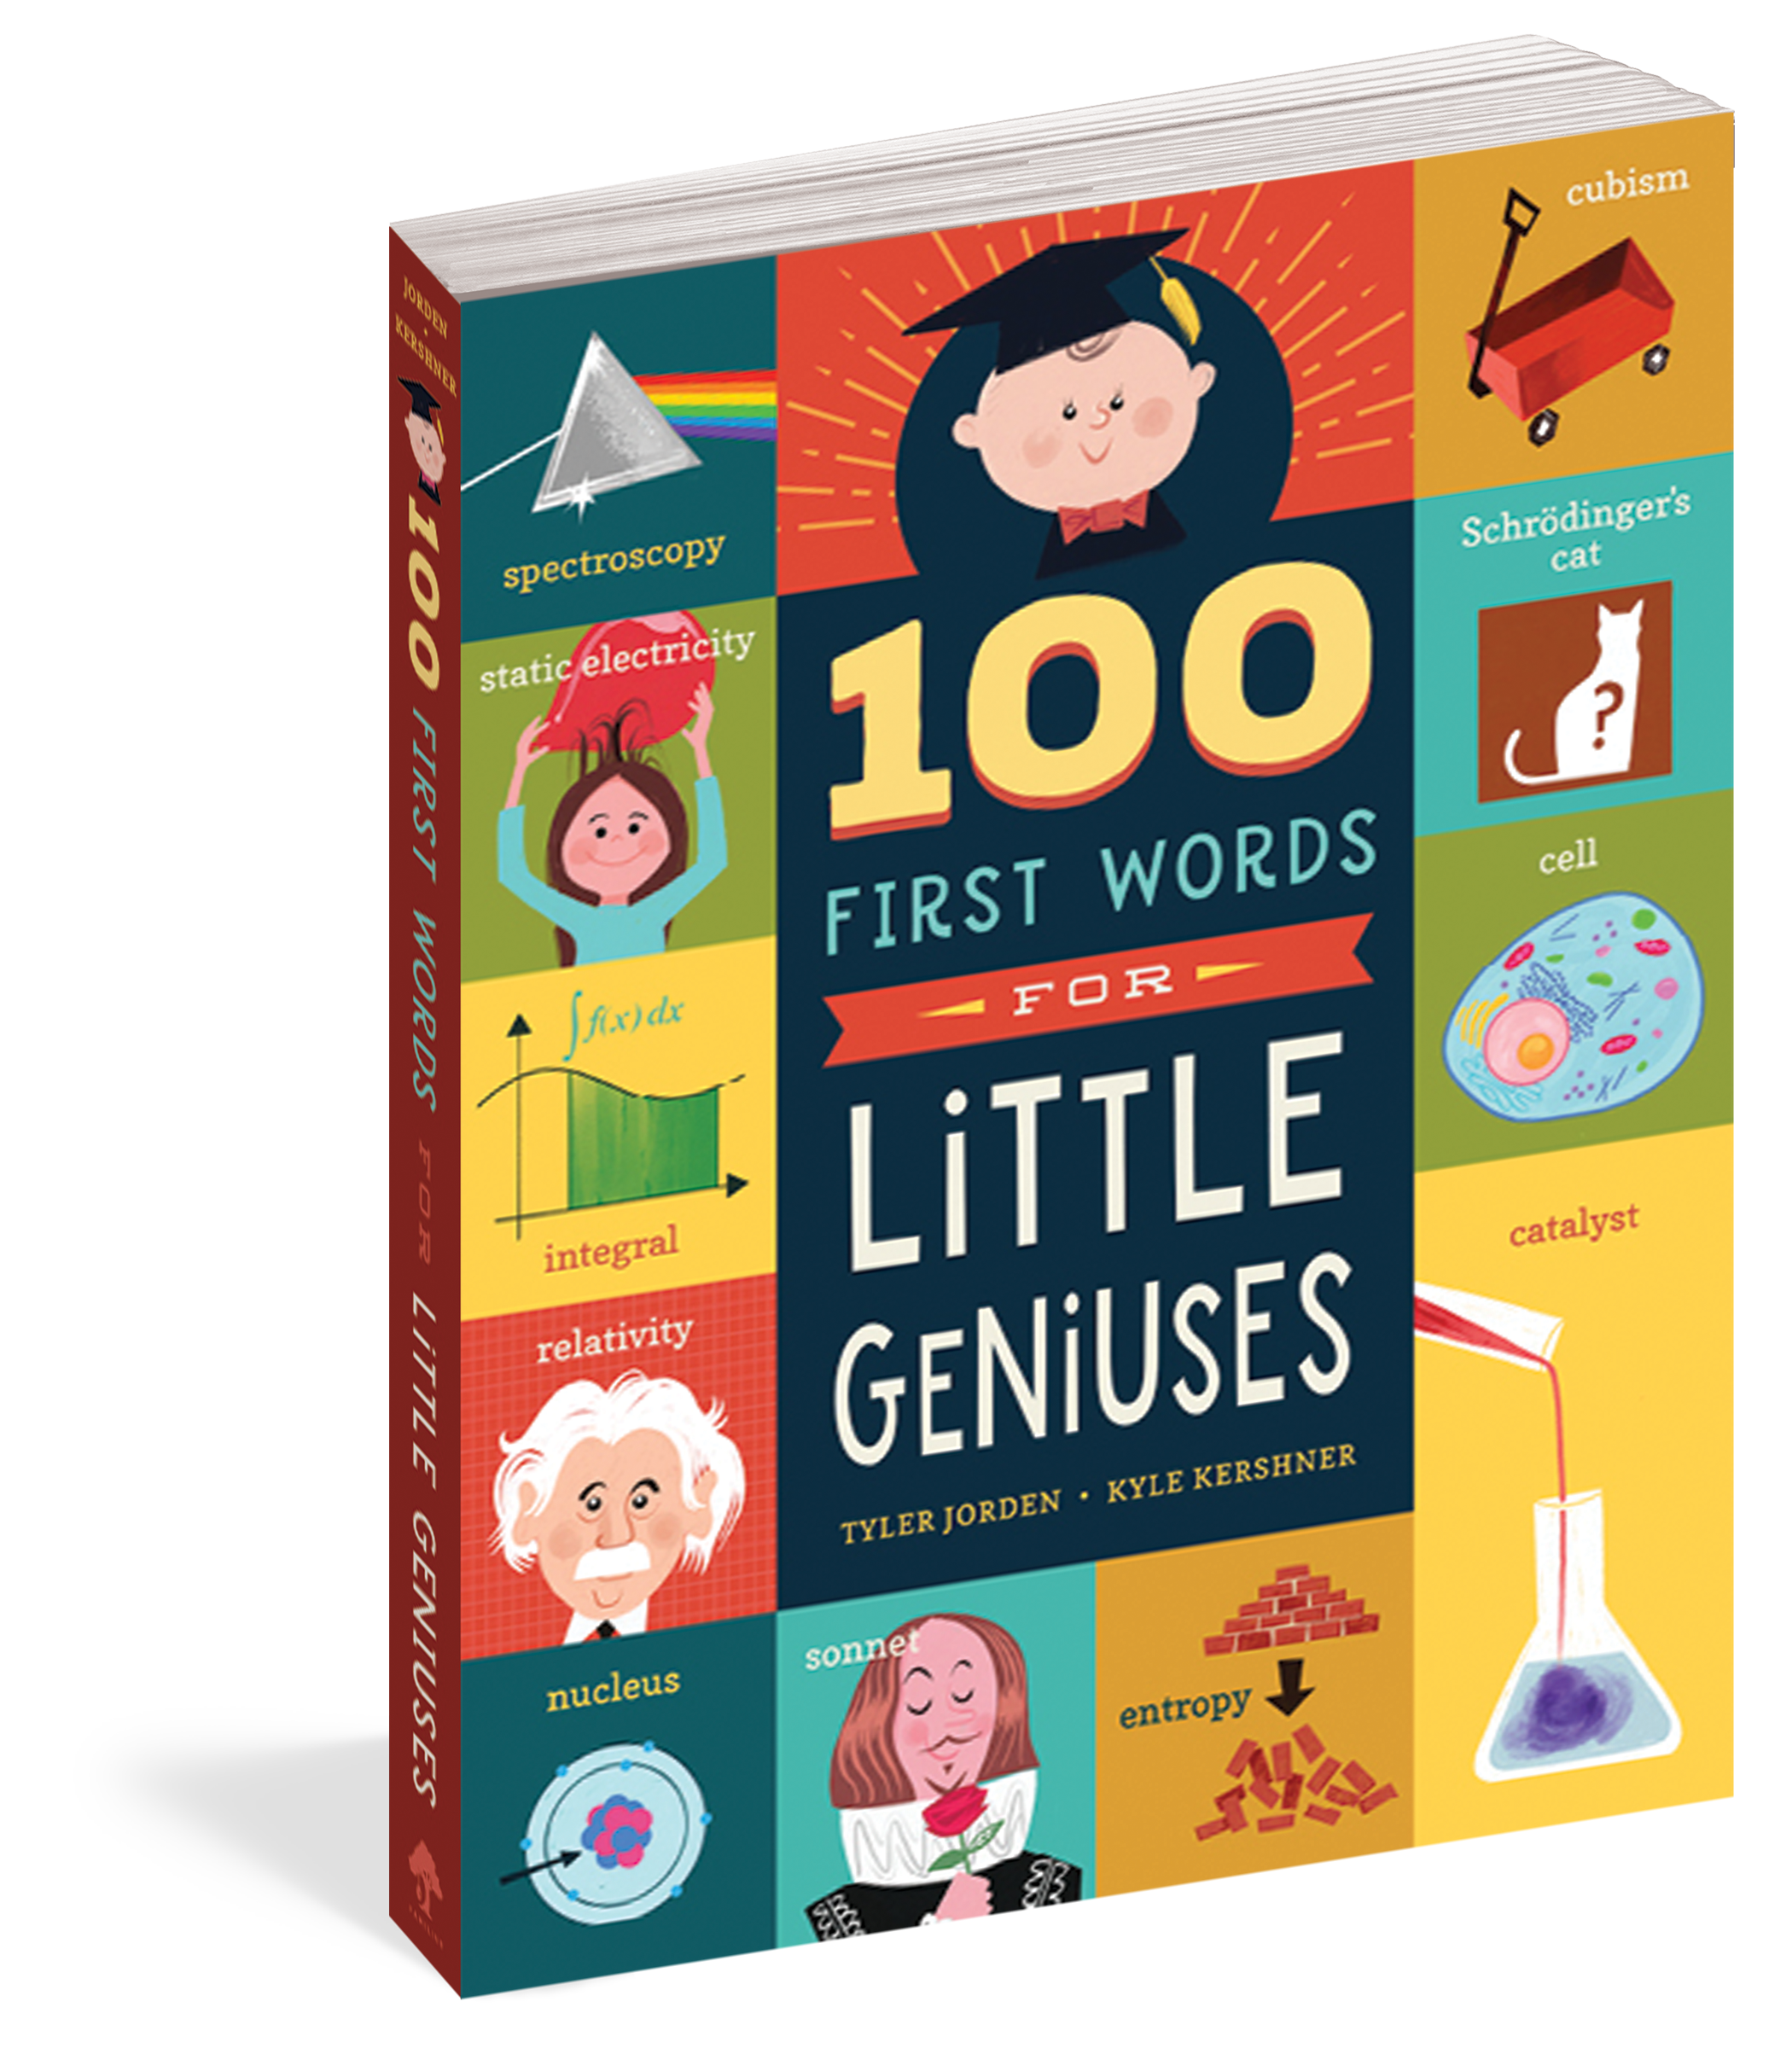 100 First Words, Little Geniuses